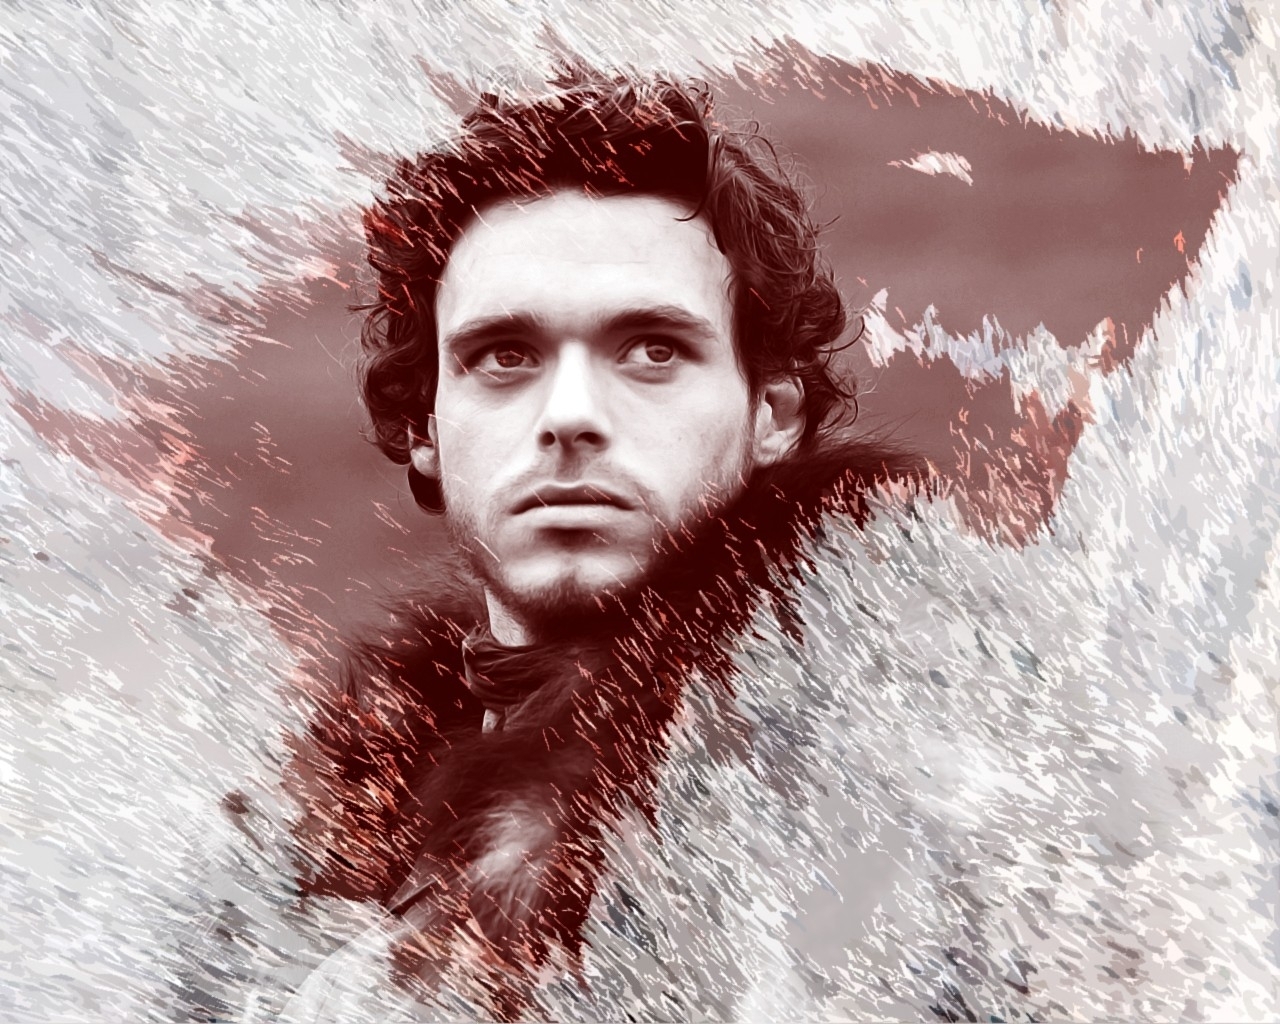 Fantasy Art Game Of Thrones A Song Of Ice And Fire - Game Of Thrones Robb Starks - HD Wallpaper 